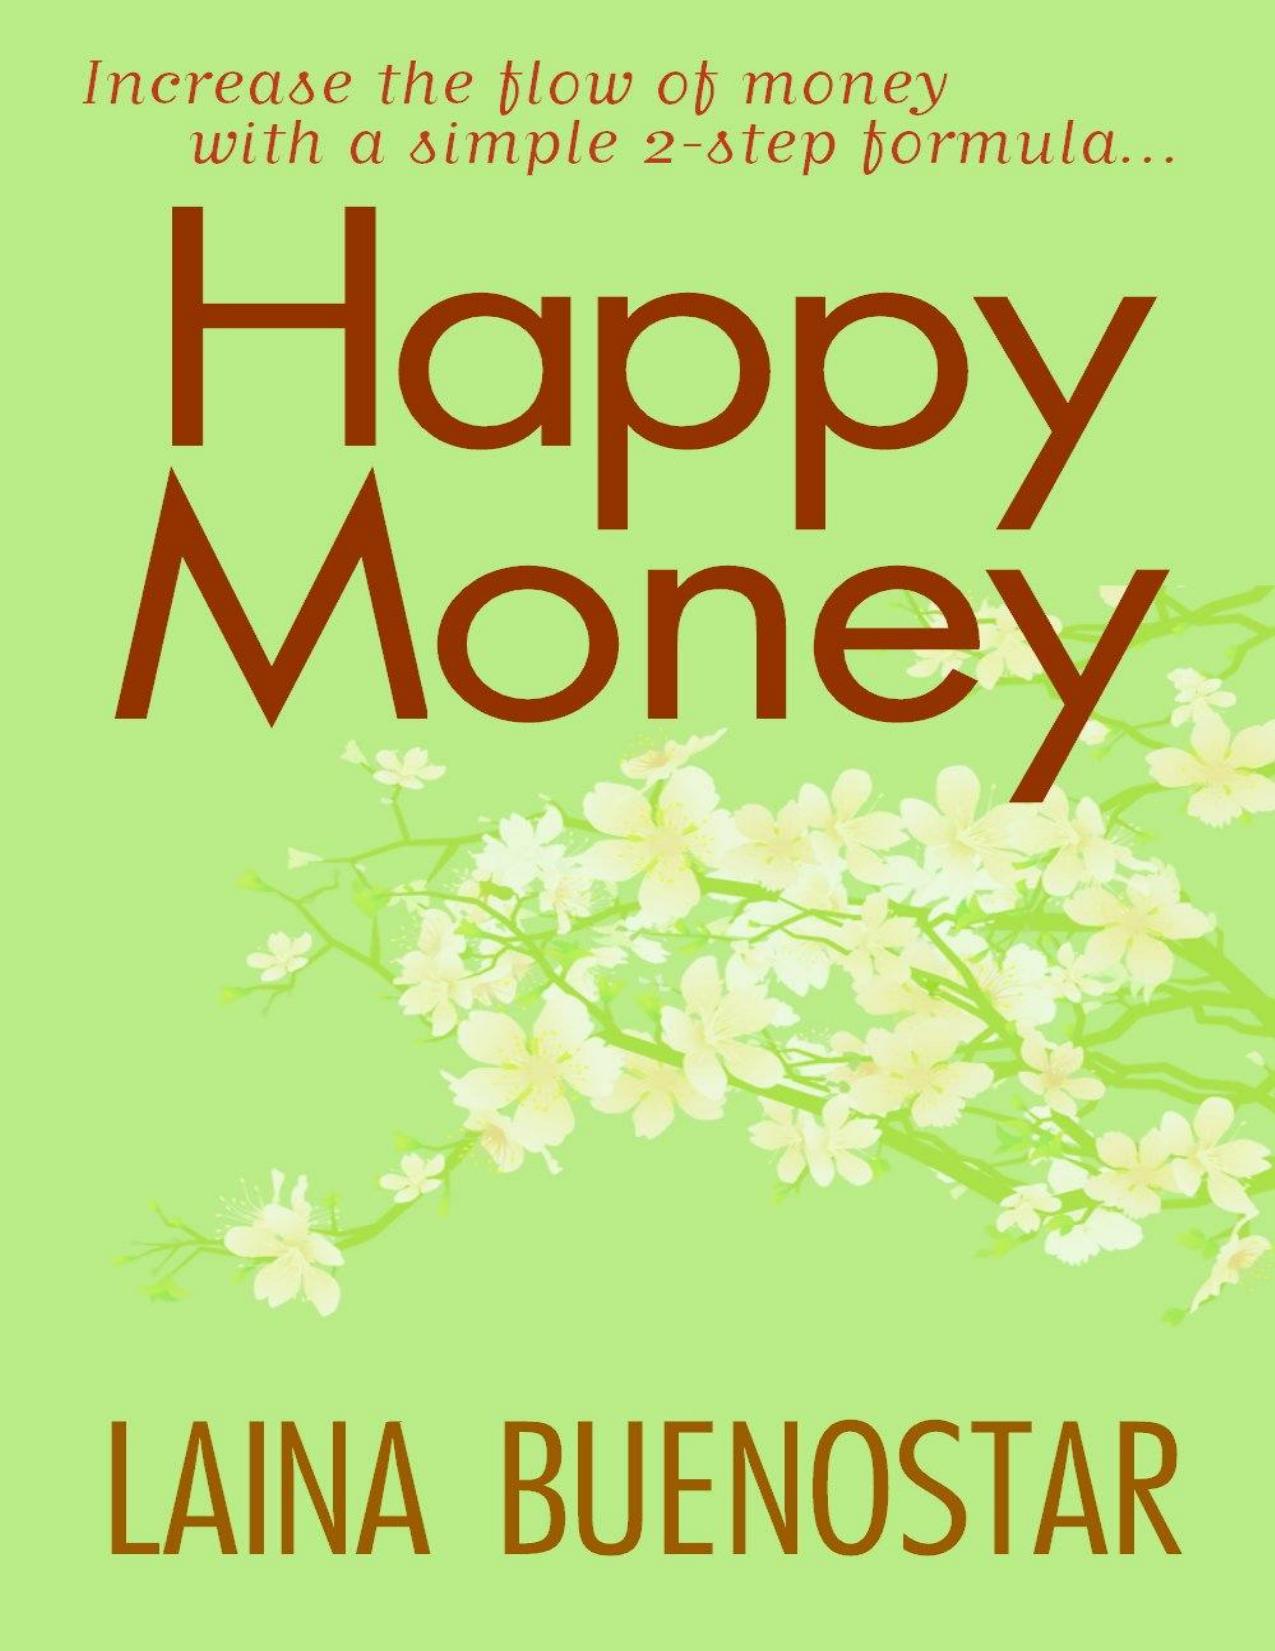 Happy Money (Increase the Flow of Money with a Simple 2-Step Formula) by Laina Buenostar